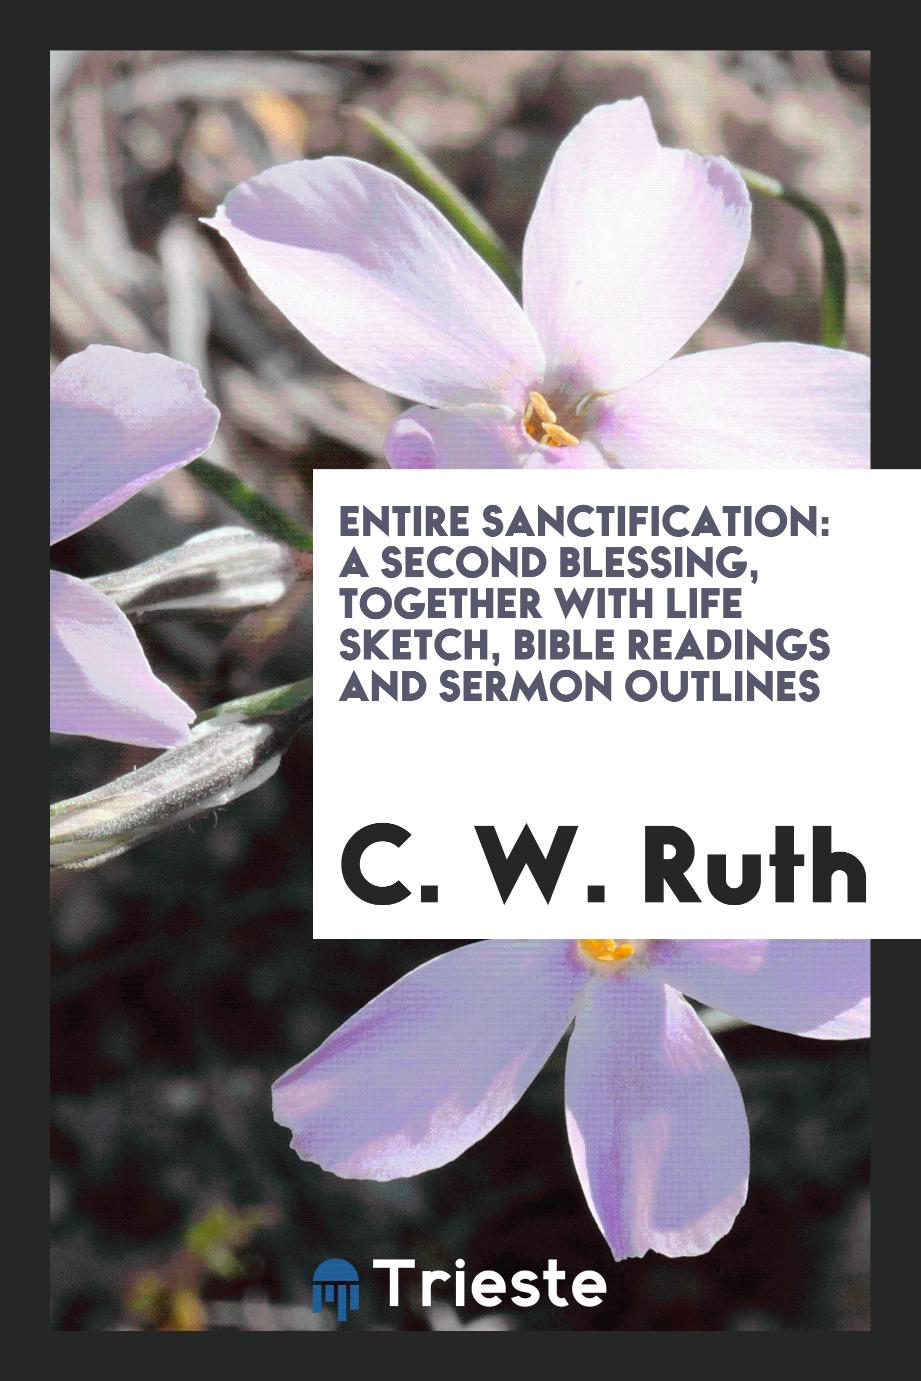 Entire sanctification: a second blessing, together with life sketch, bible readings and sermon outlines